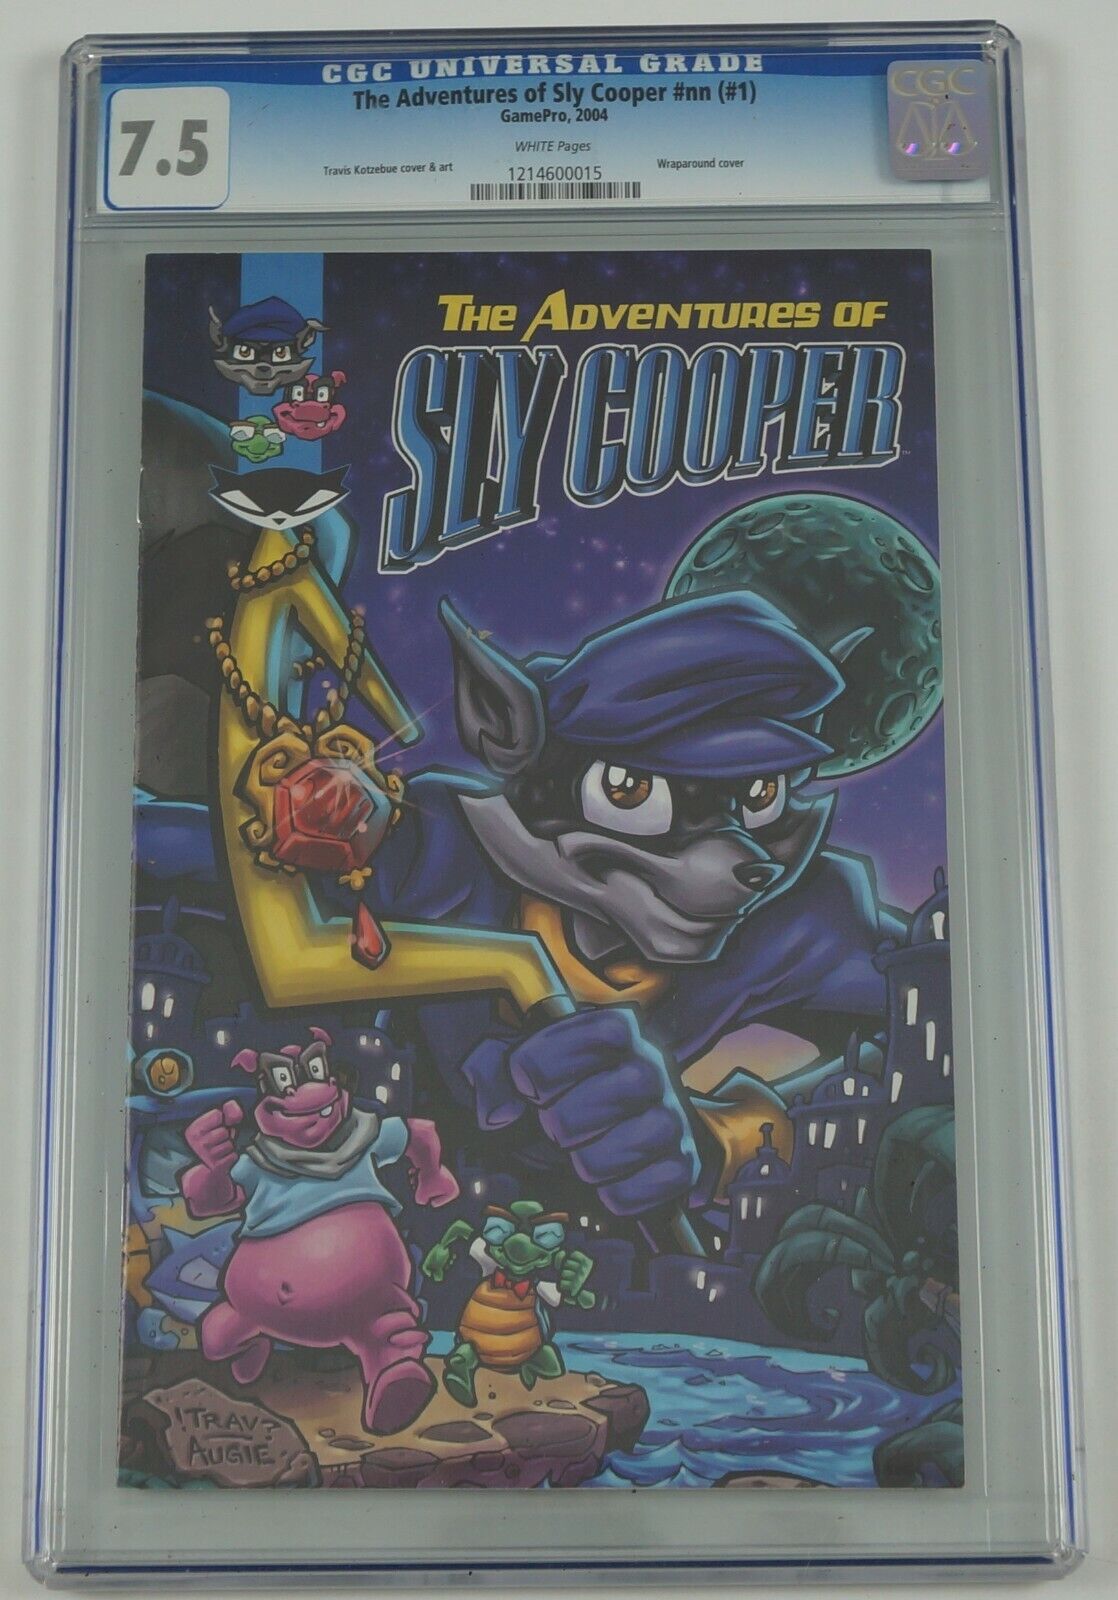 the Adventures of Sly Cooper #1 CGC 7.5 - gamepro #nn videogame - white pages